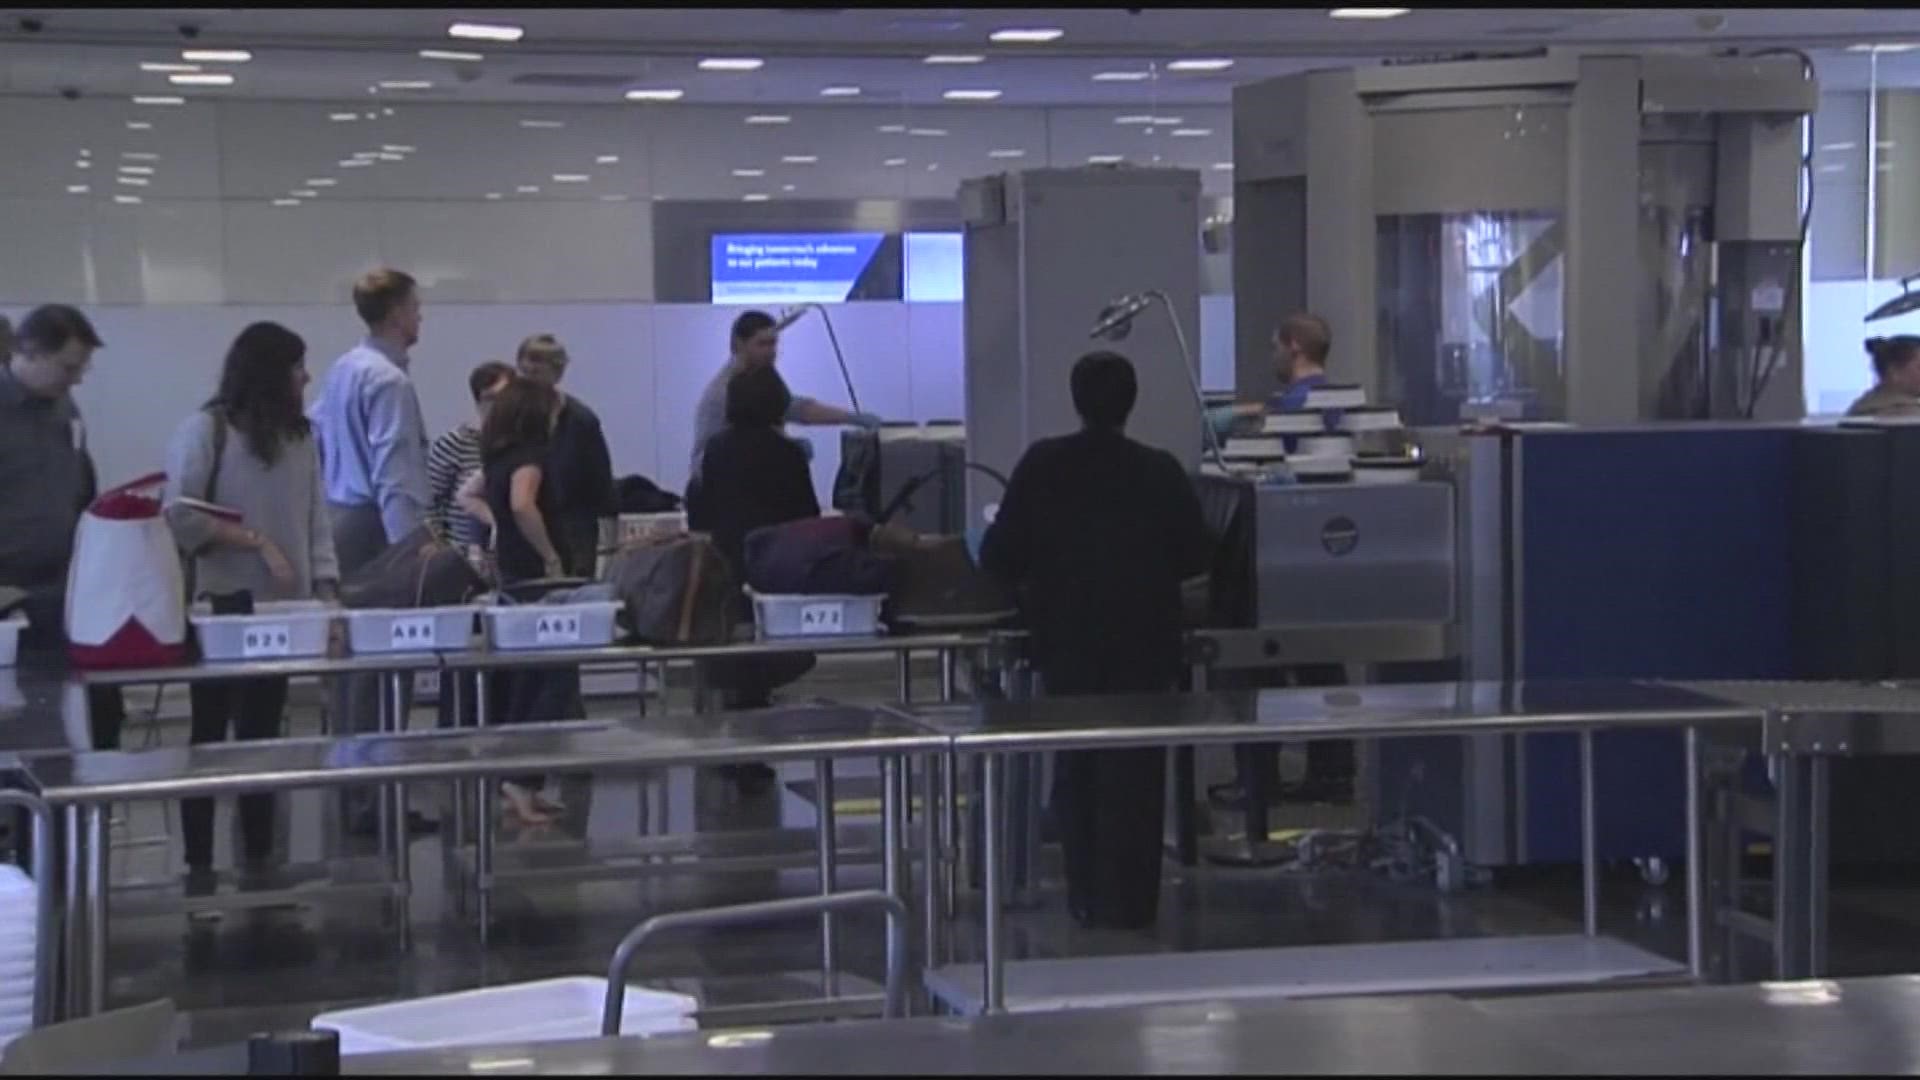 Officials say they are ramping up security efforts ahead of the busy travel week.